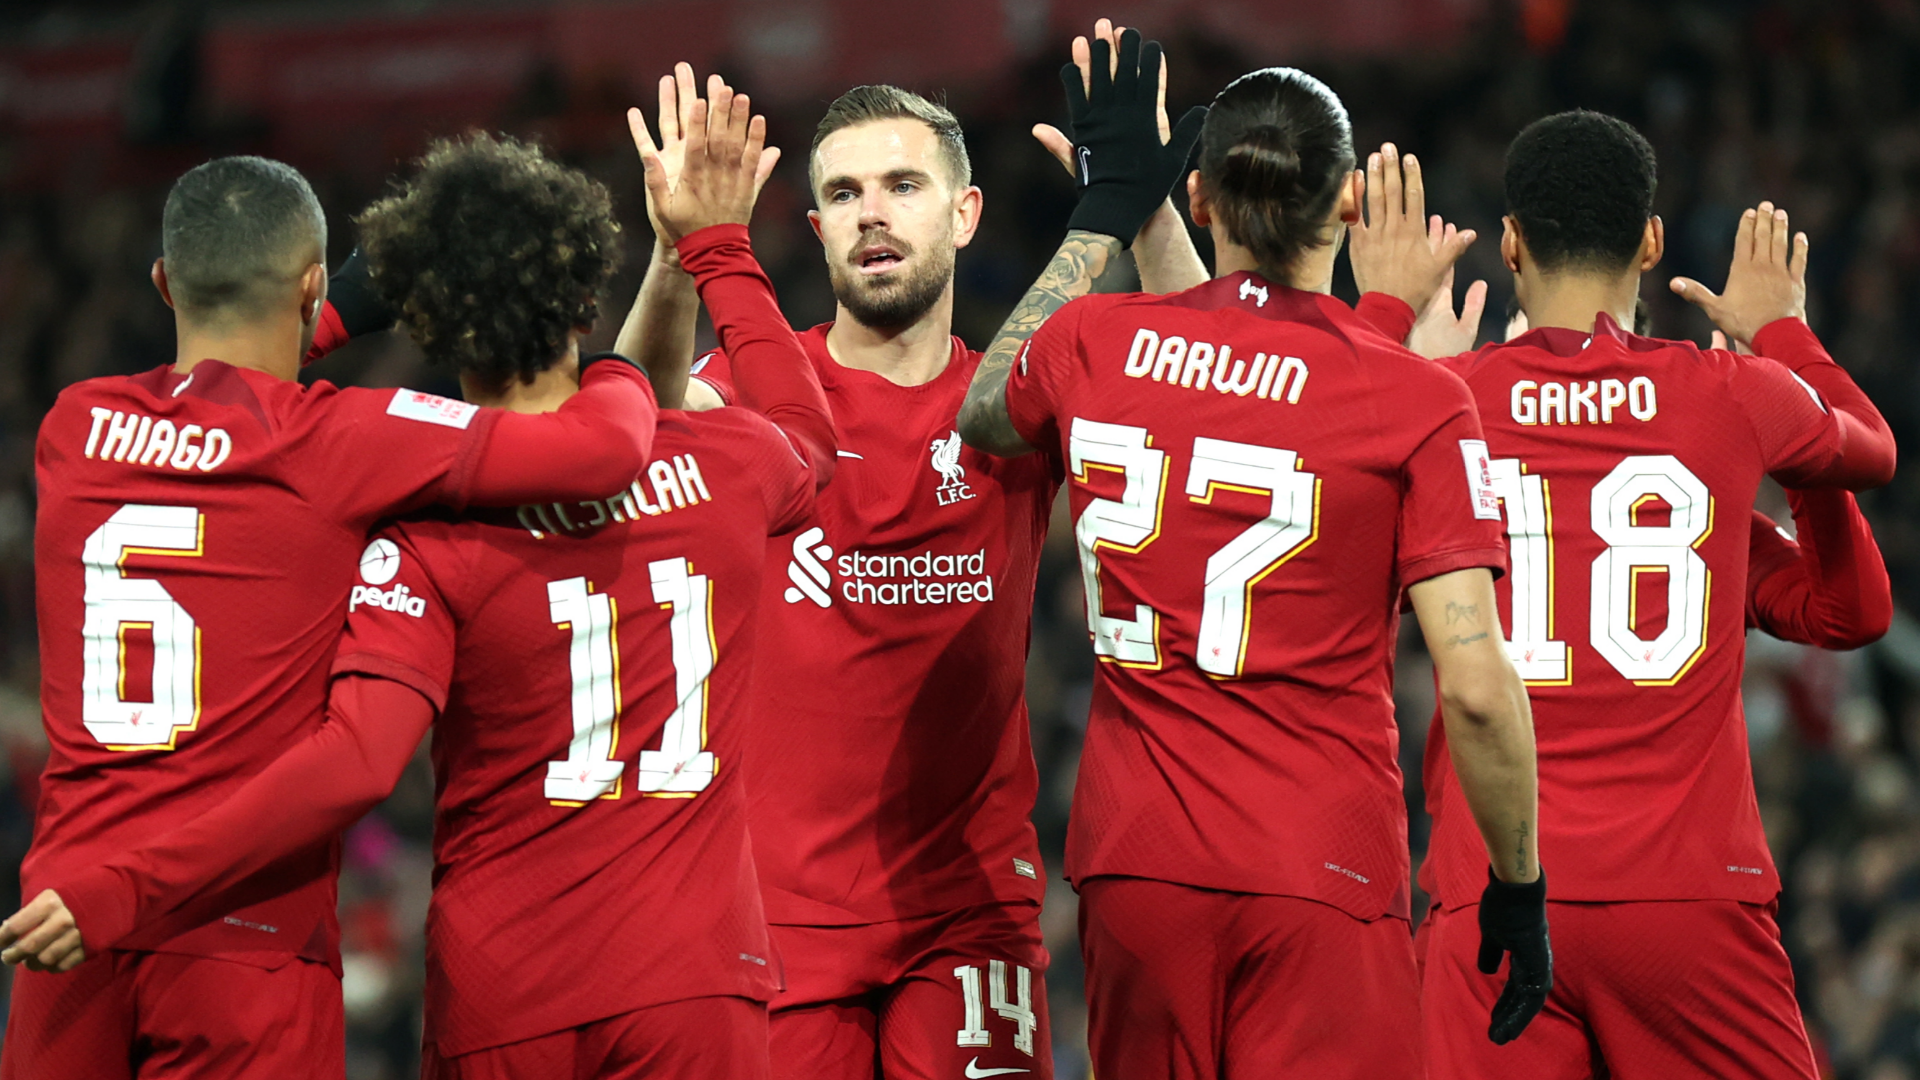 Liverpool vs Aston Villa Where to watch the match online, live stream, TV channels, and kick-off time Goal US